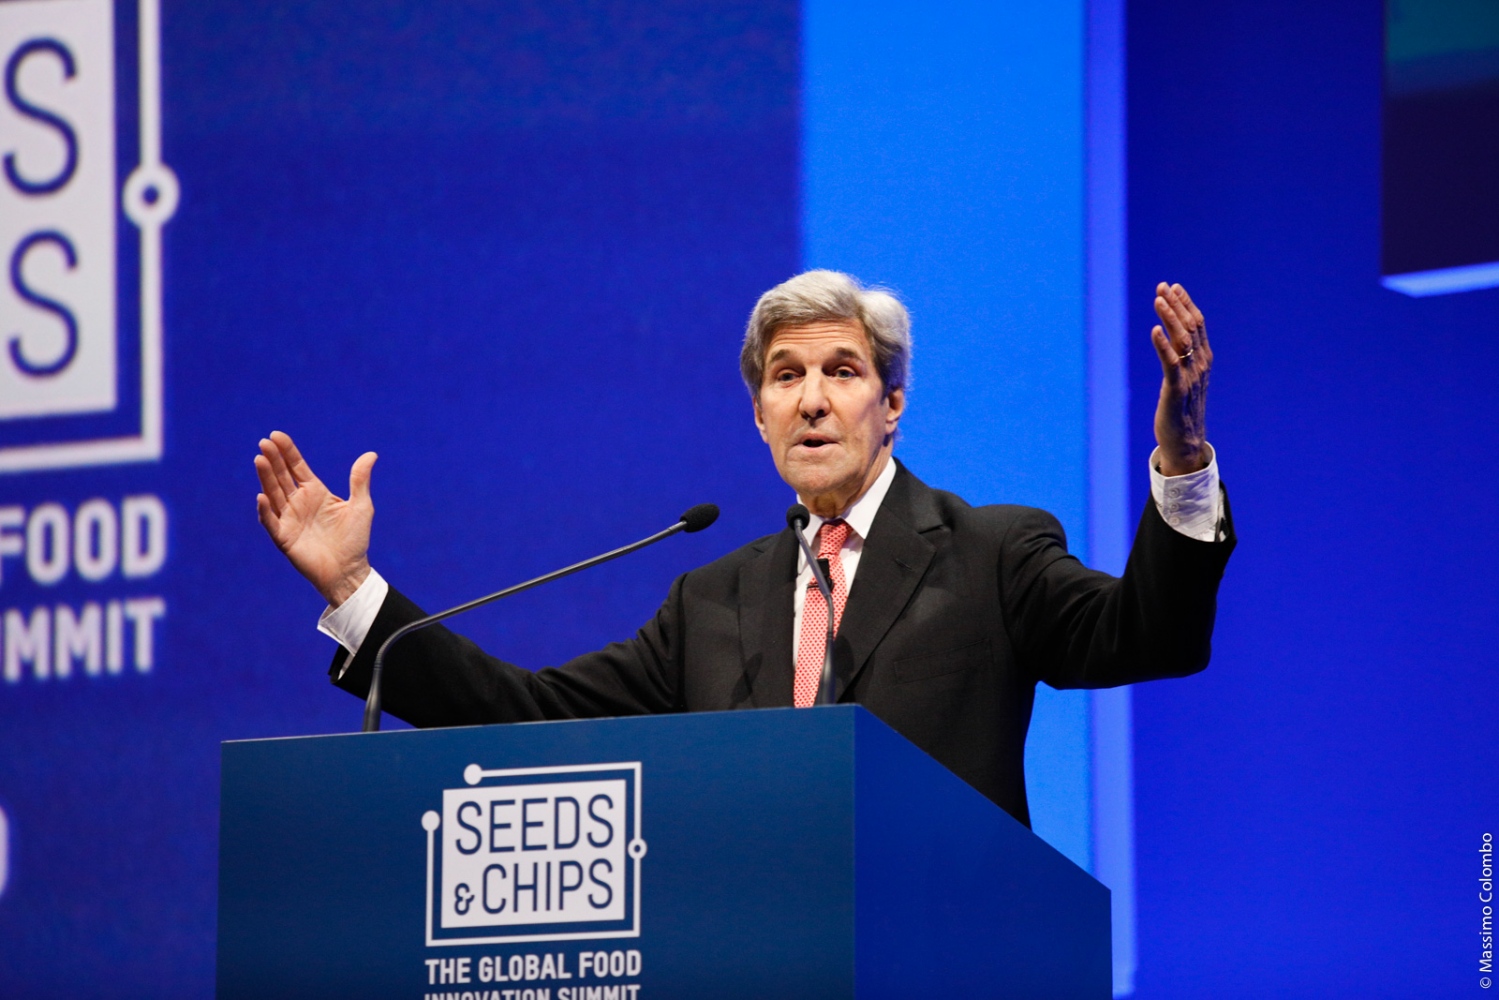 My pics on LifeGate network. May 8th, Milan, Italy. SeedsandChips, the leading food innovation summit for the world. Remarks by John F. Kerry - 68th U.S. Secretary of State